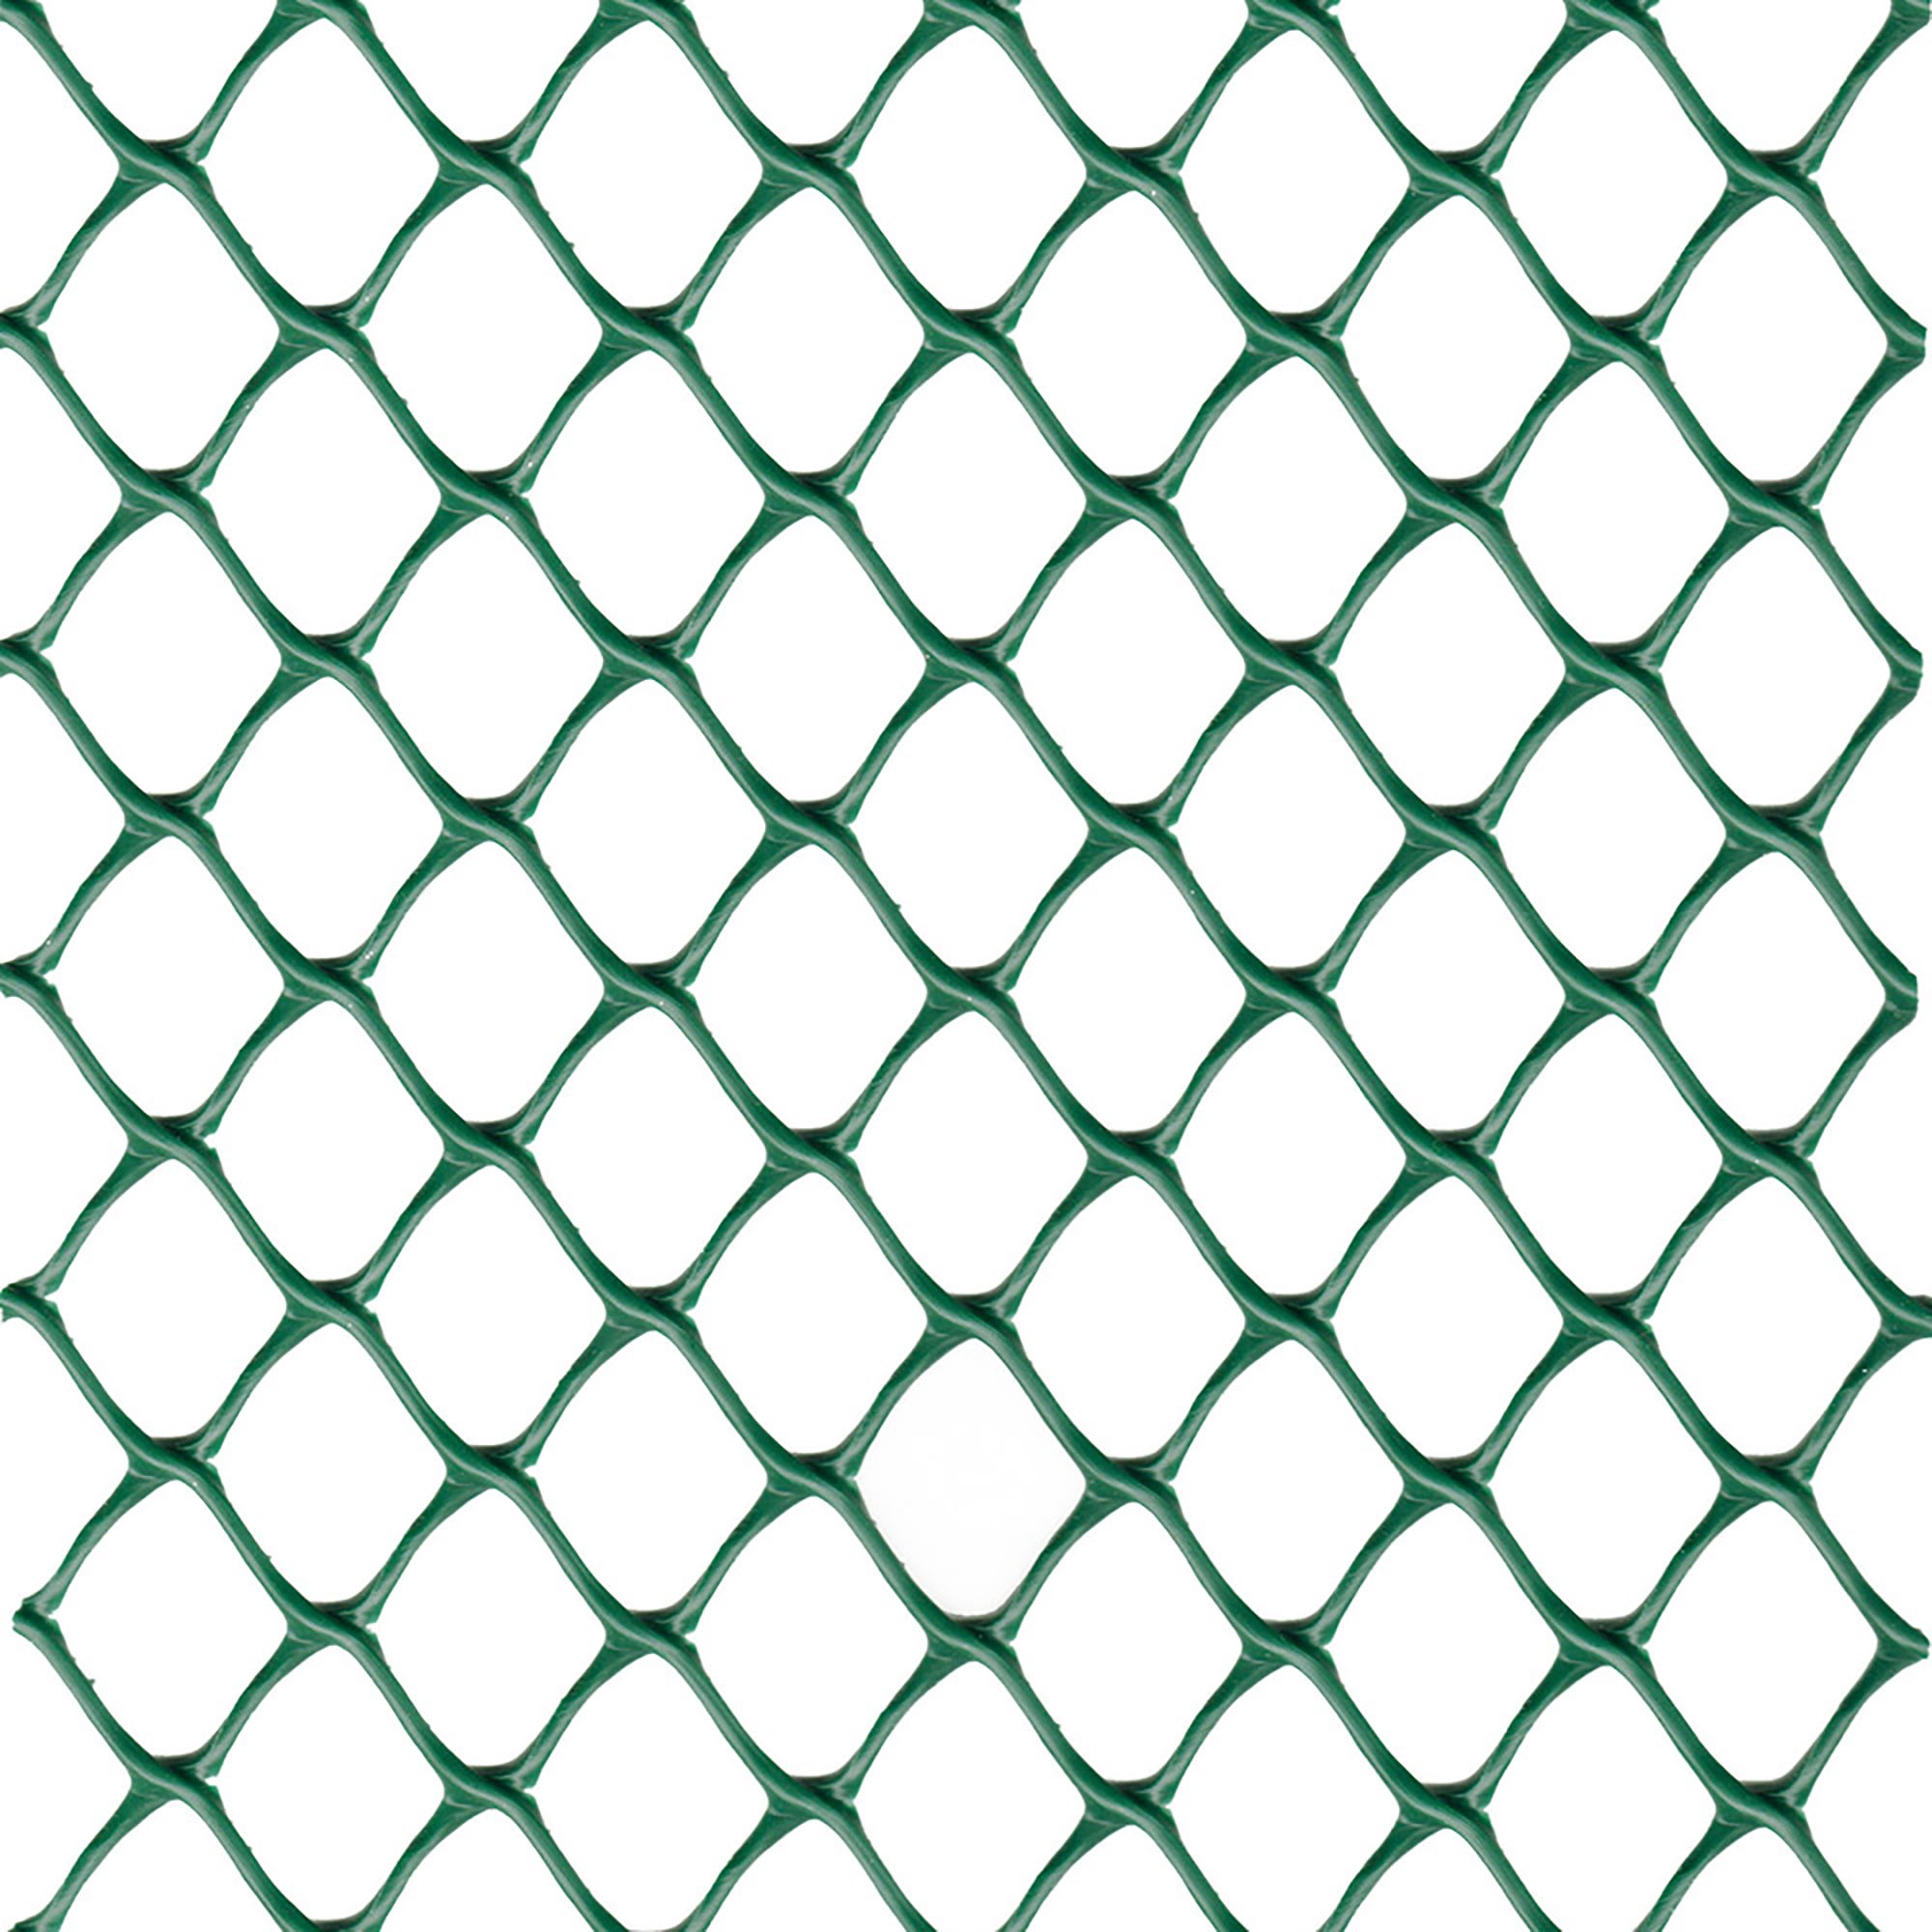 Lime Green Wire – 1 yard